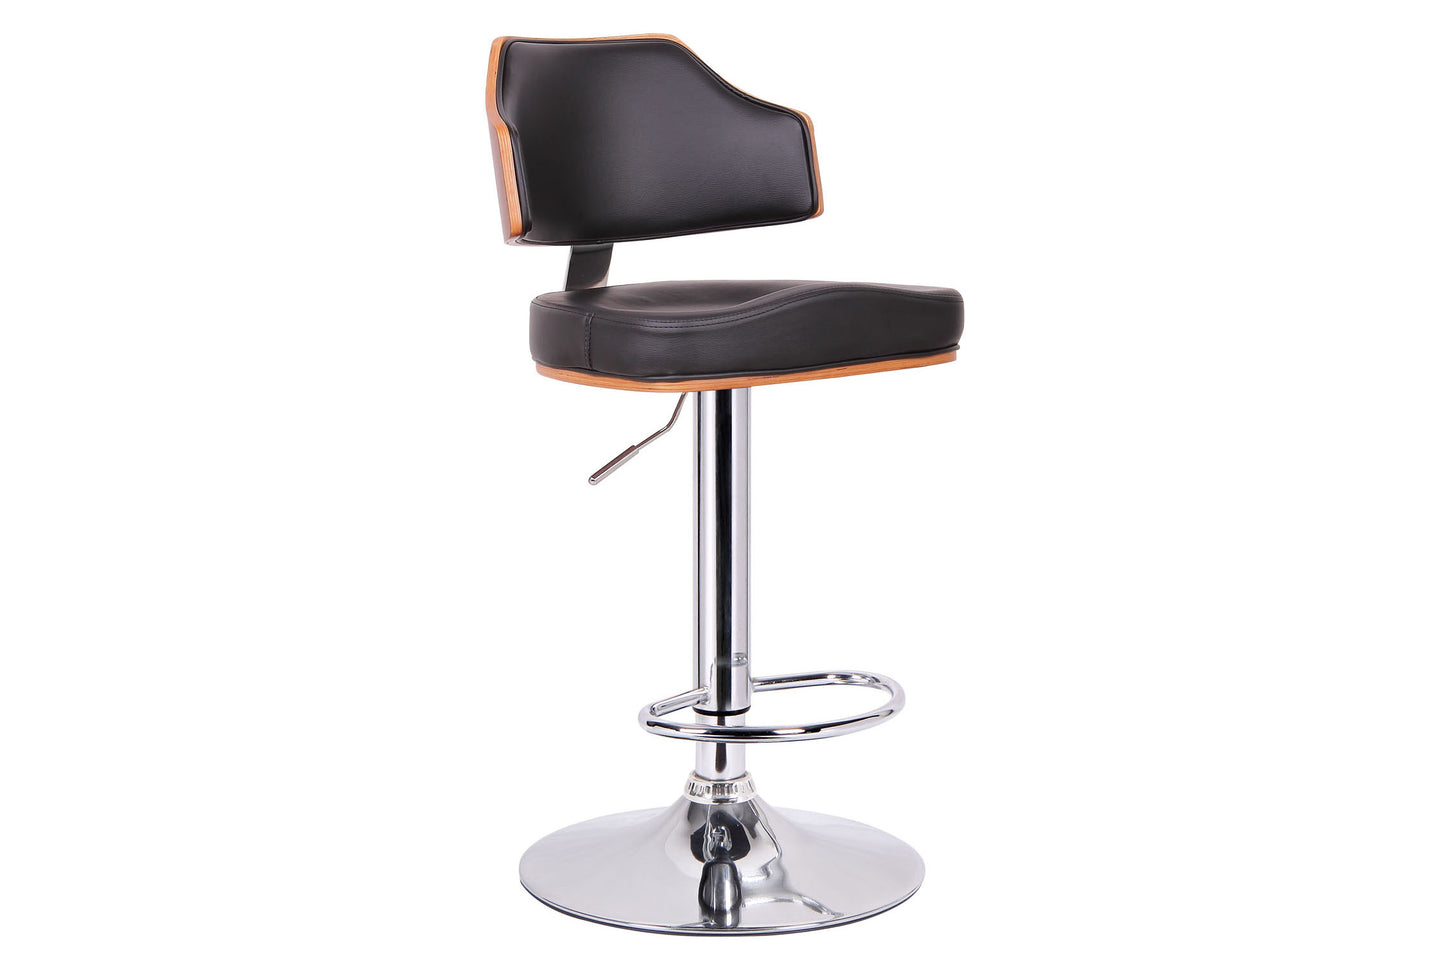 Contemporary Leatherette & Chrome Bar Stool in Walnut Brown & Black bxi4213-80